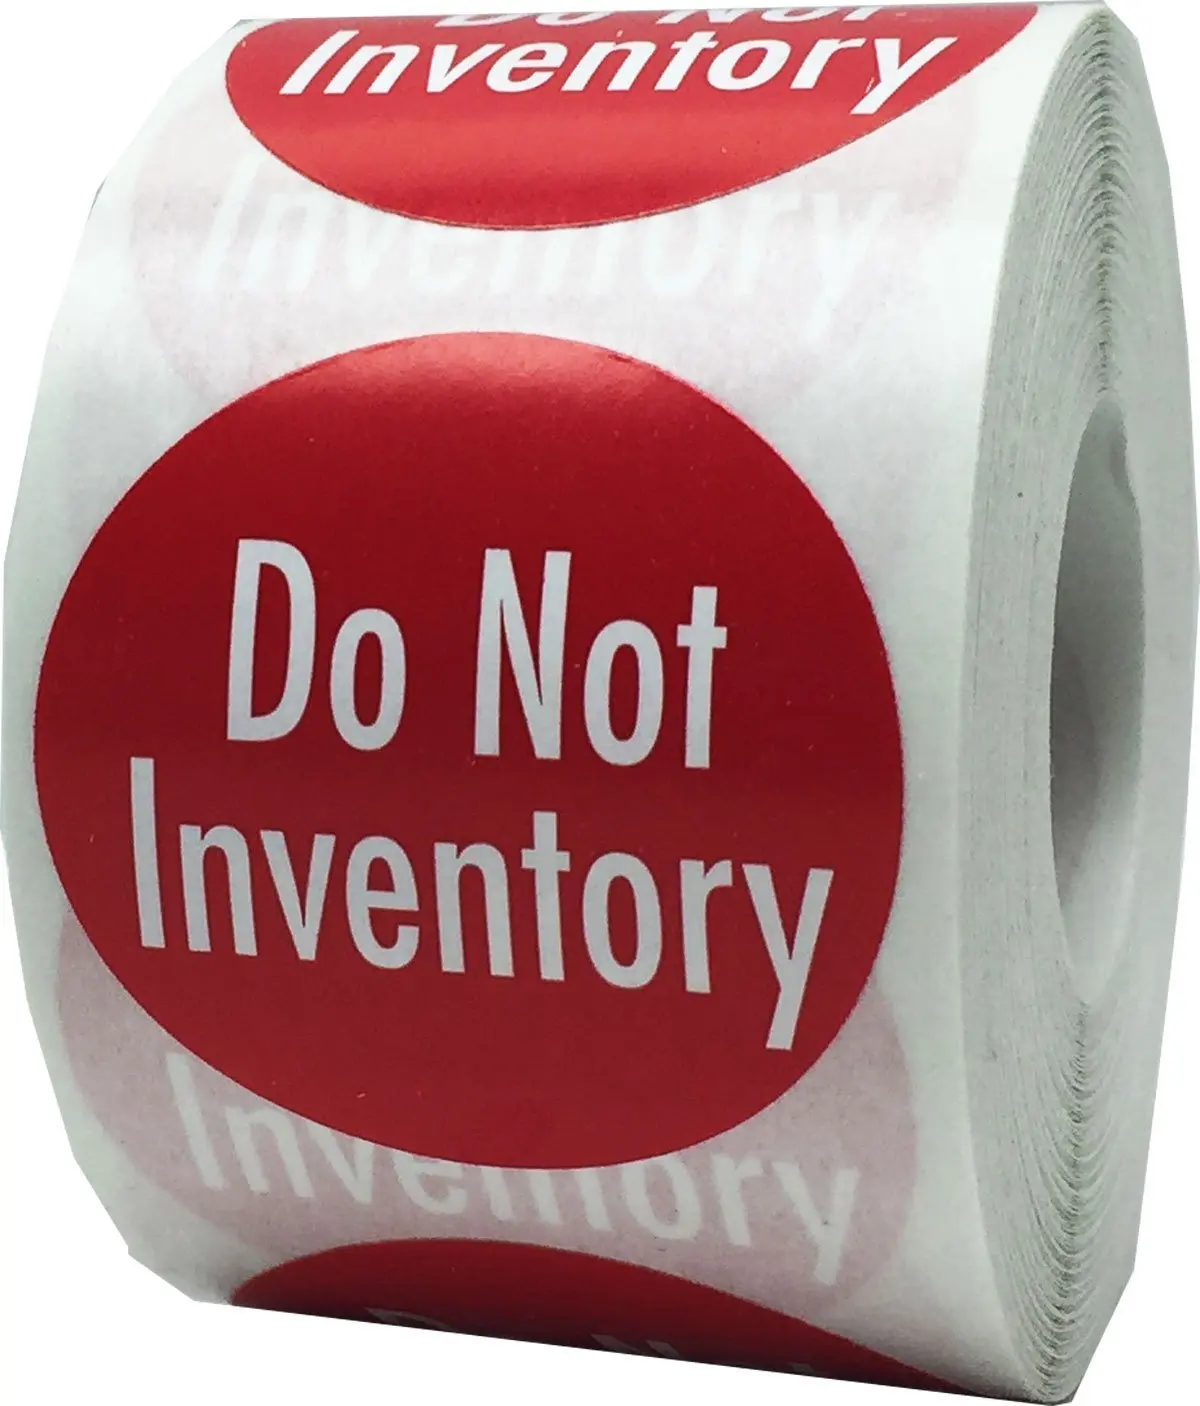 Cheap Inventory Stickers find Inventory Stickers deals on line at